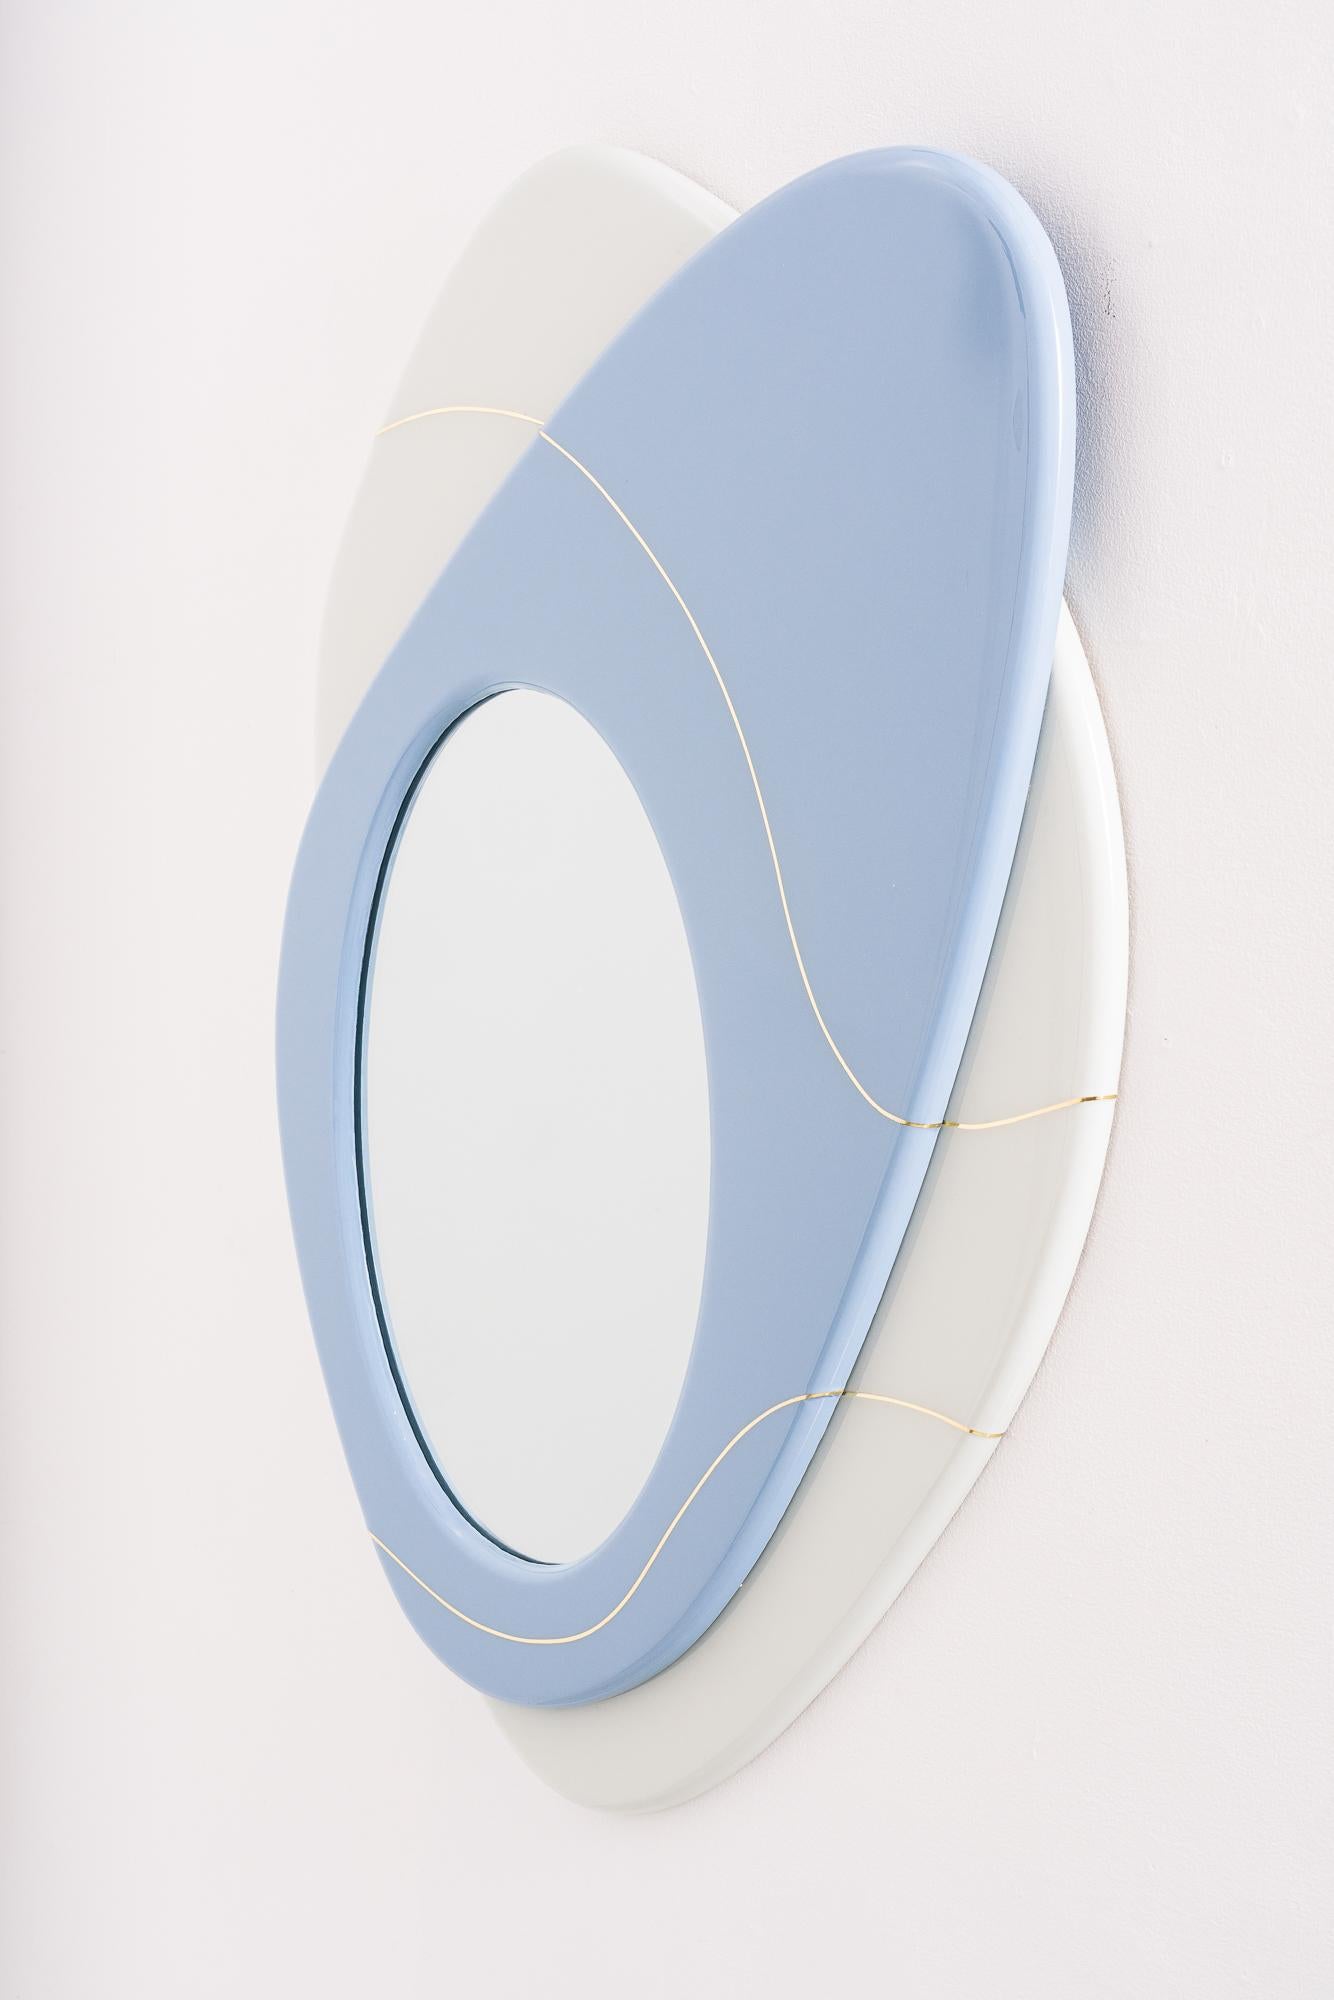 American Divergent Mirror II, USA For Sale